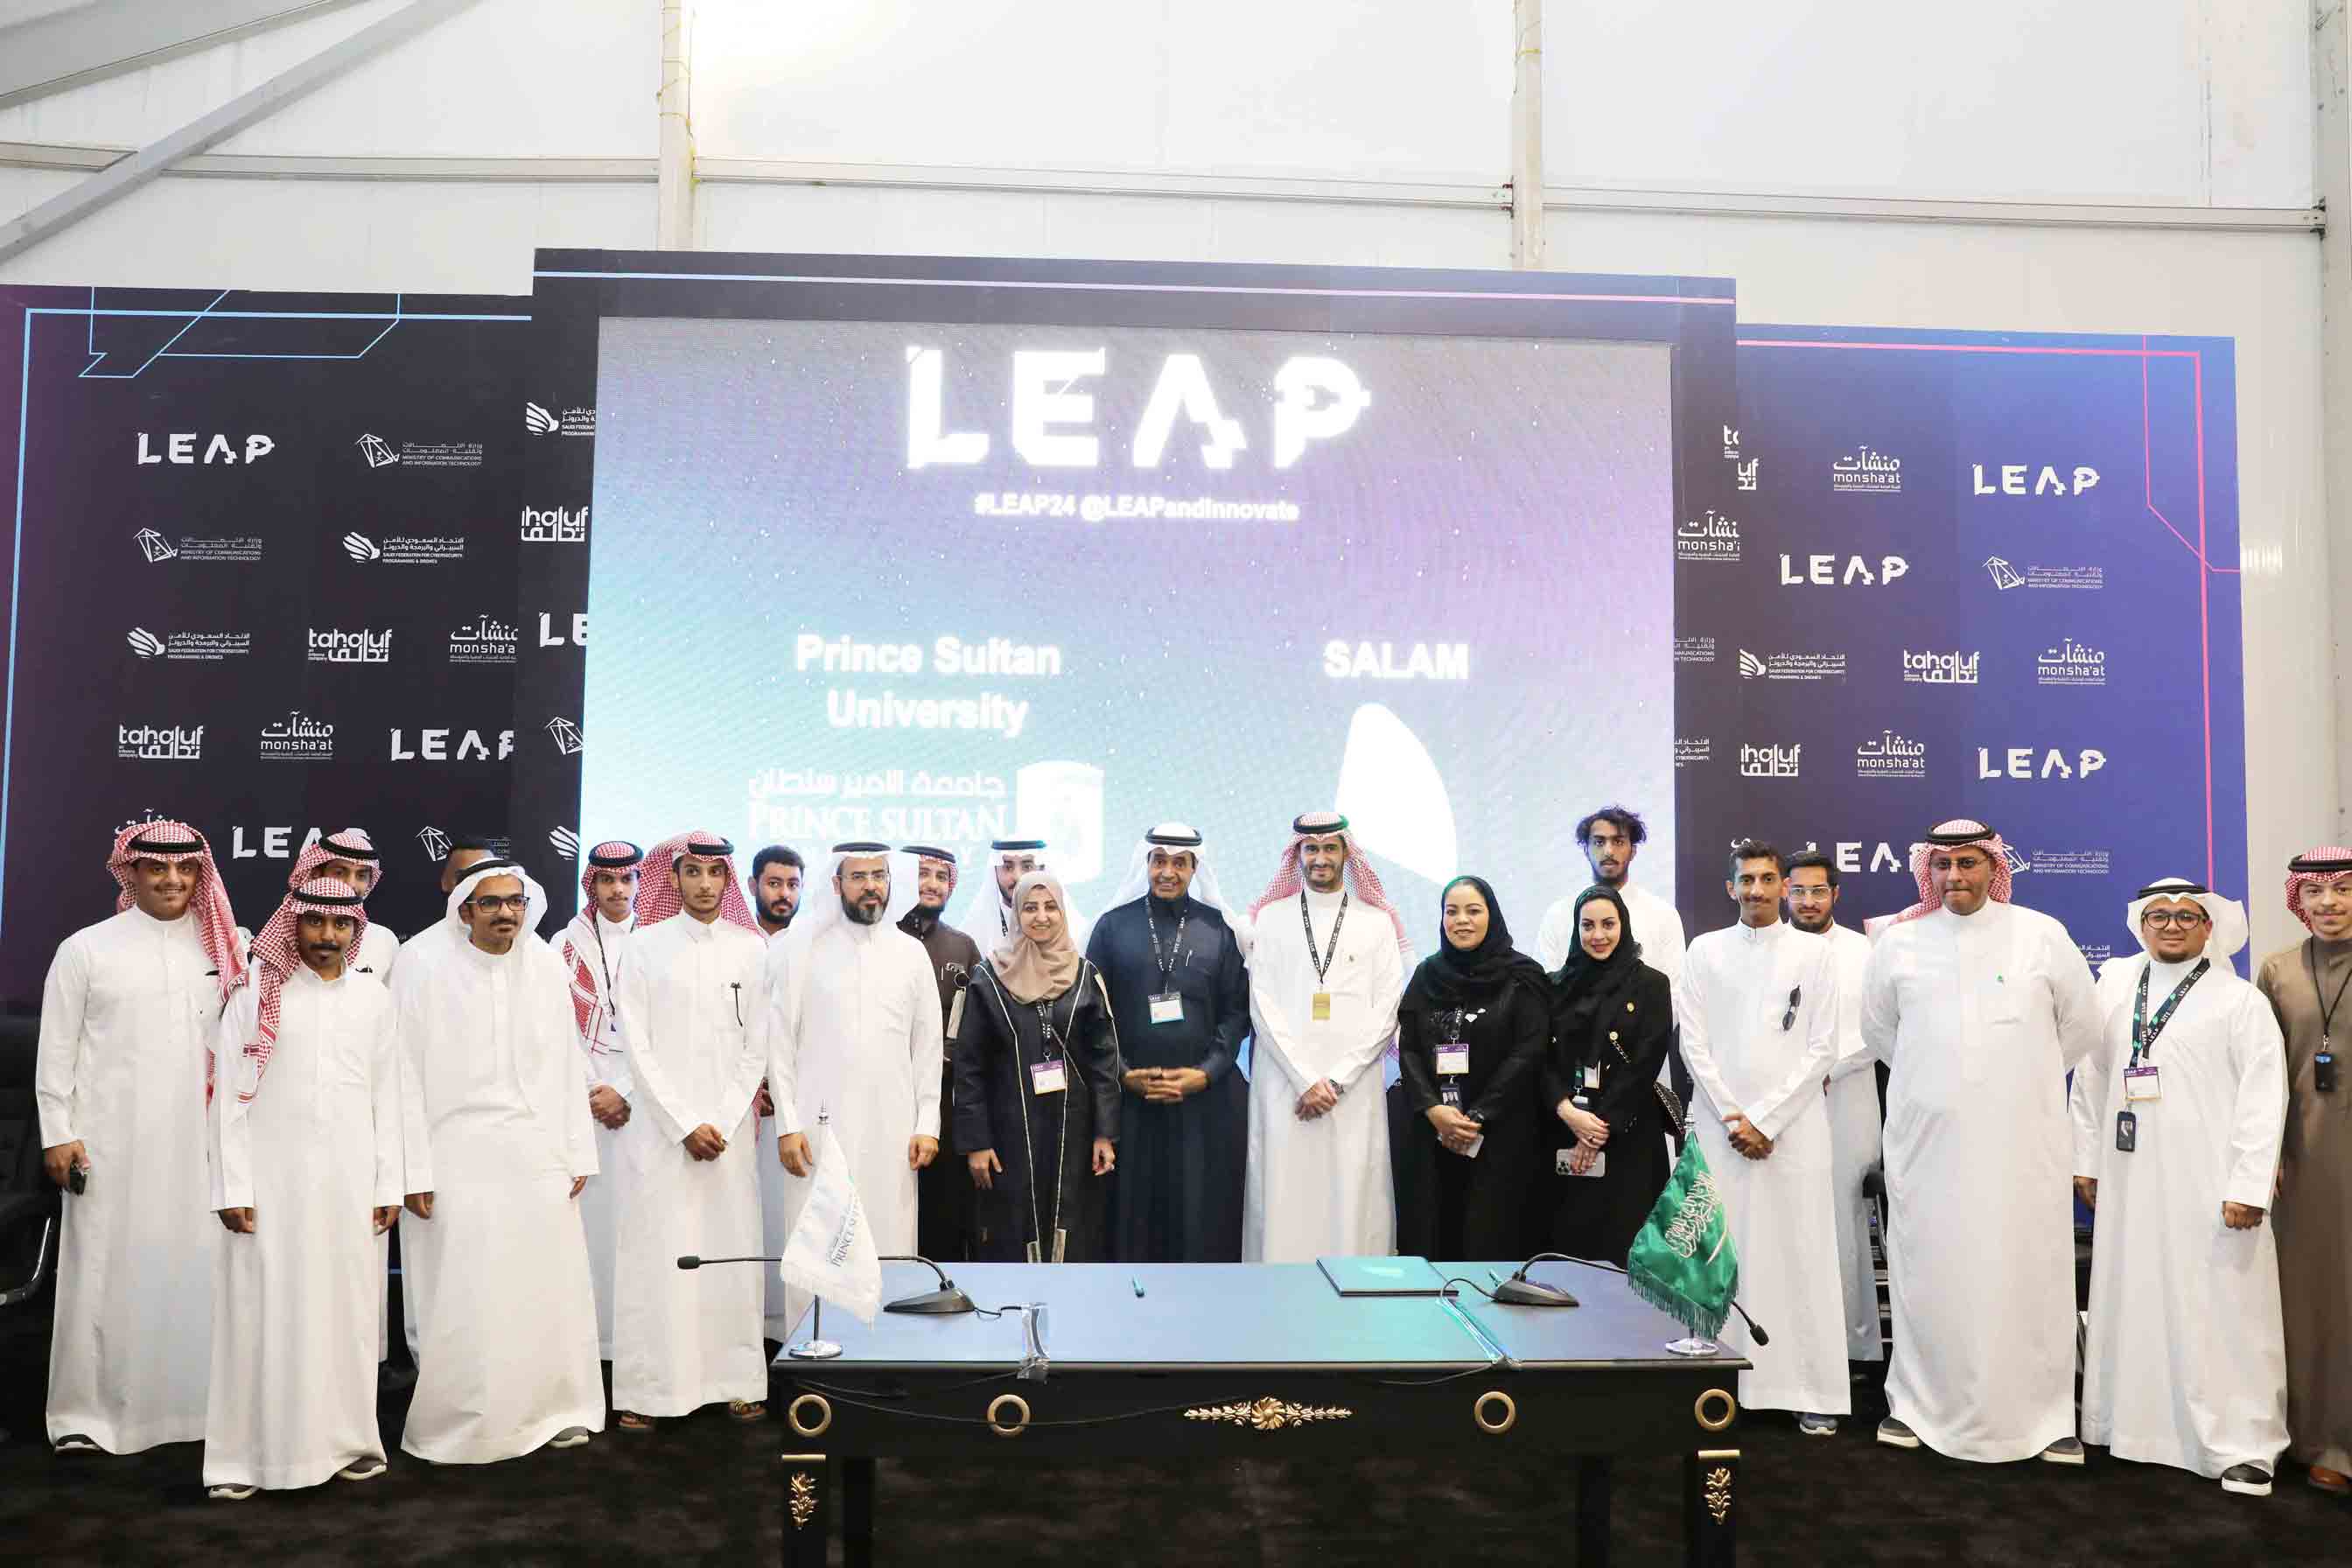 The university participates in the international technical conference Leap 24 and concludes several agreements with local and international bodies